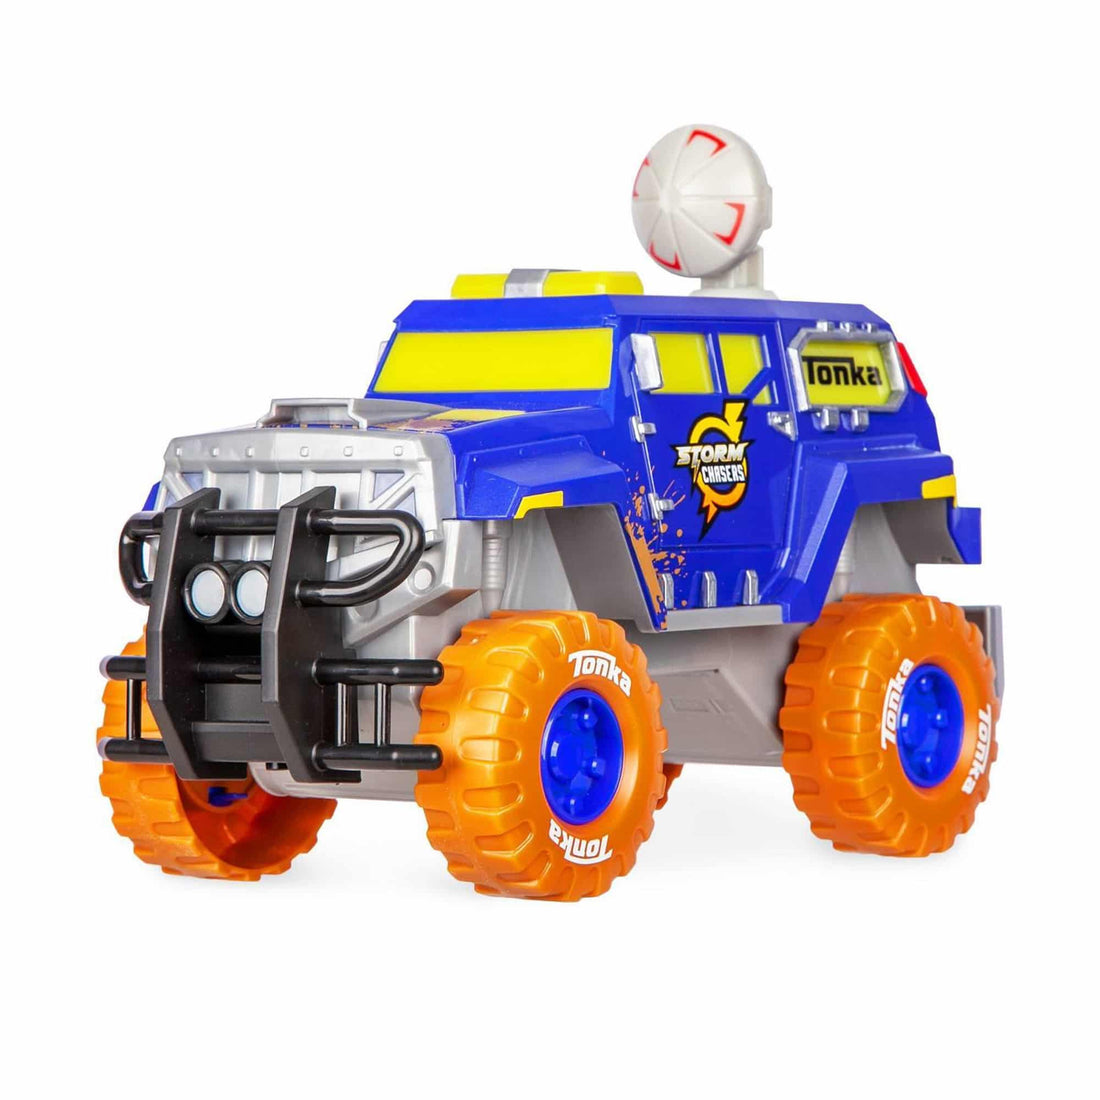 Tonka Storm Chasers Mega Machine Preview #2